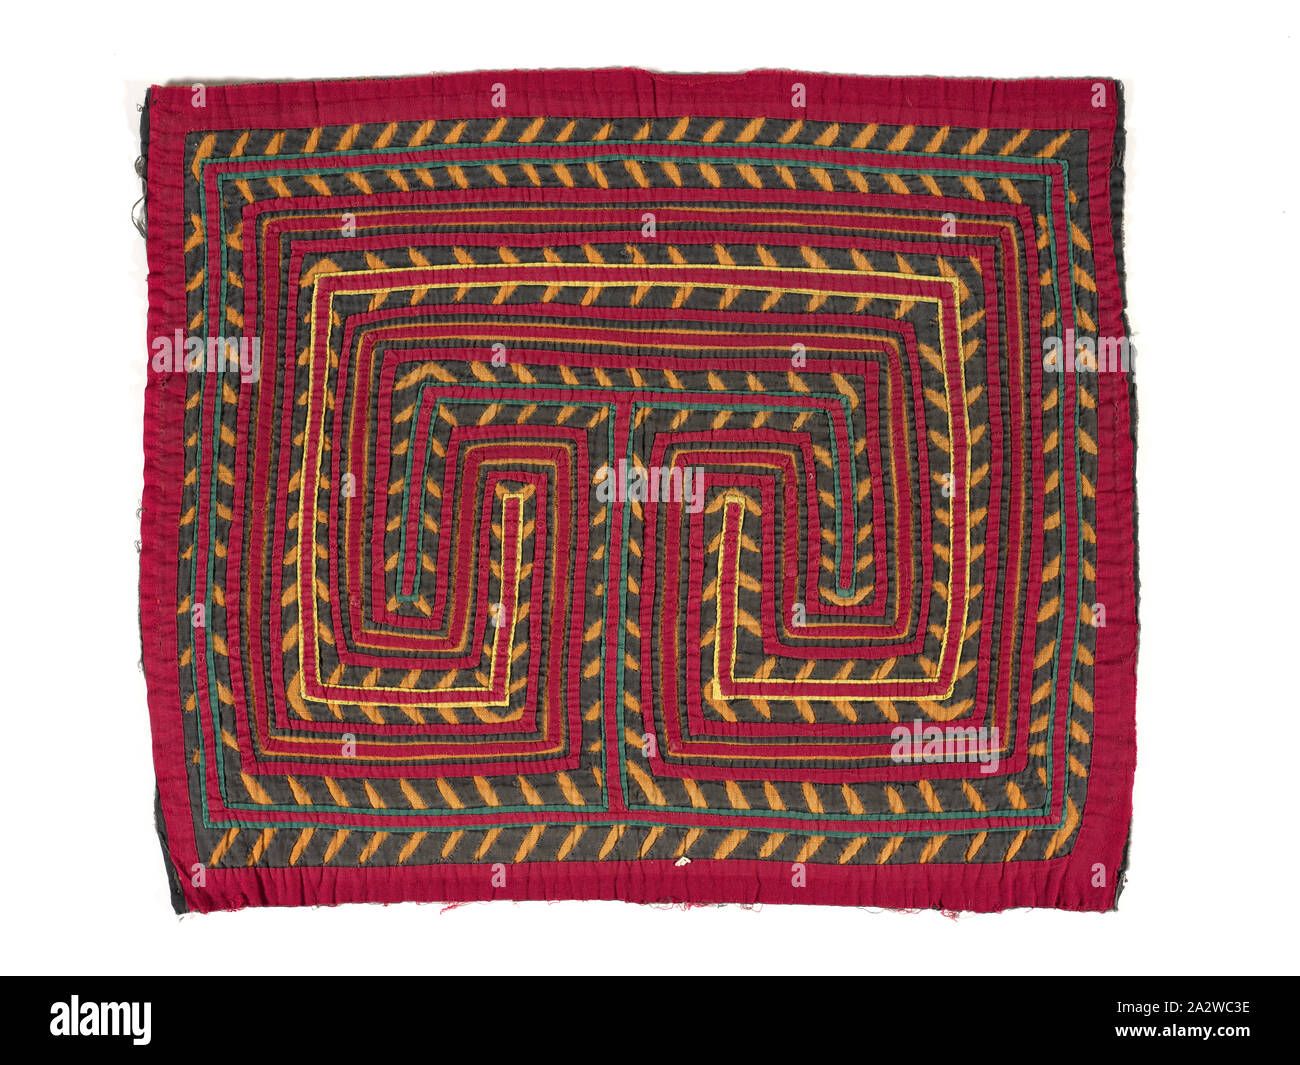 shirt panel (mola), Kuna people, about 1950s, appliqued cotton, 15-3/4 x 19-1/8 in., Textile and Fashion Arts Stock Photo